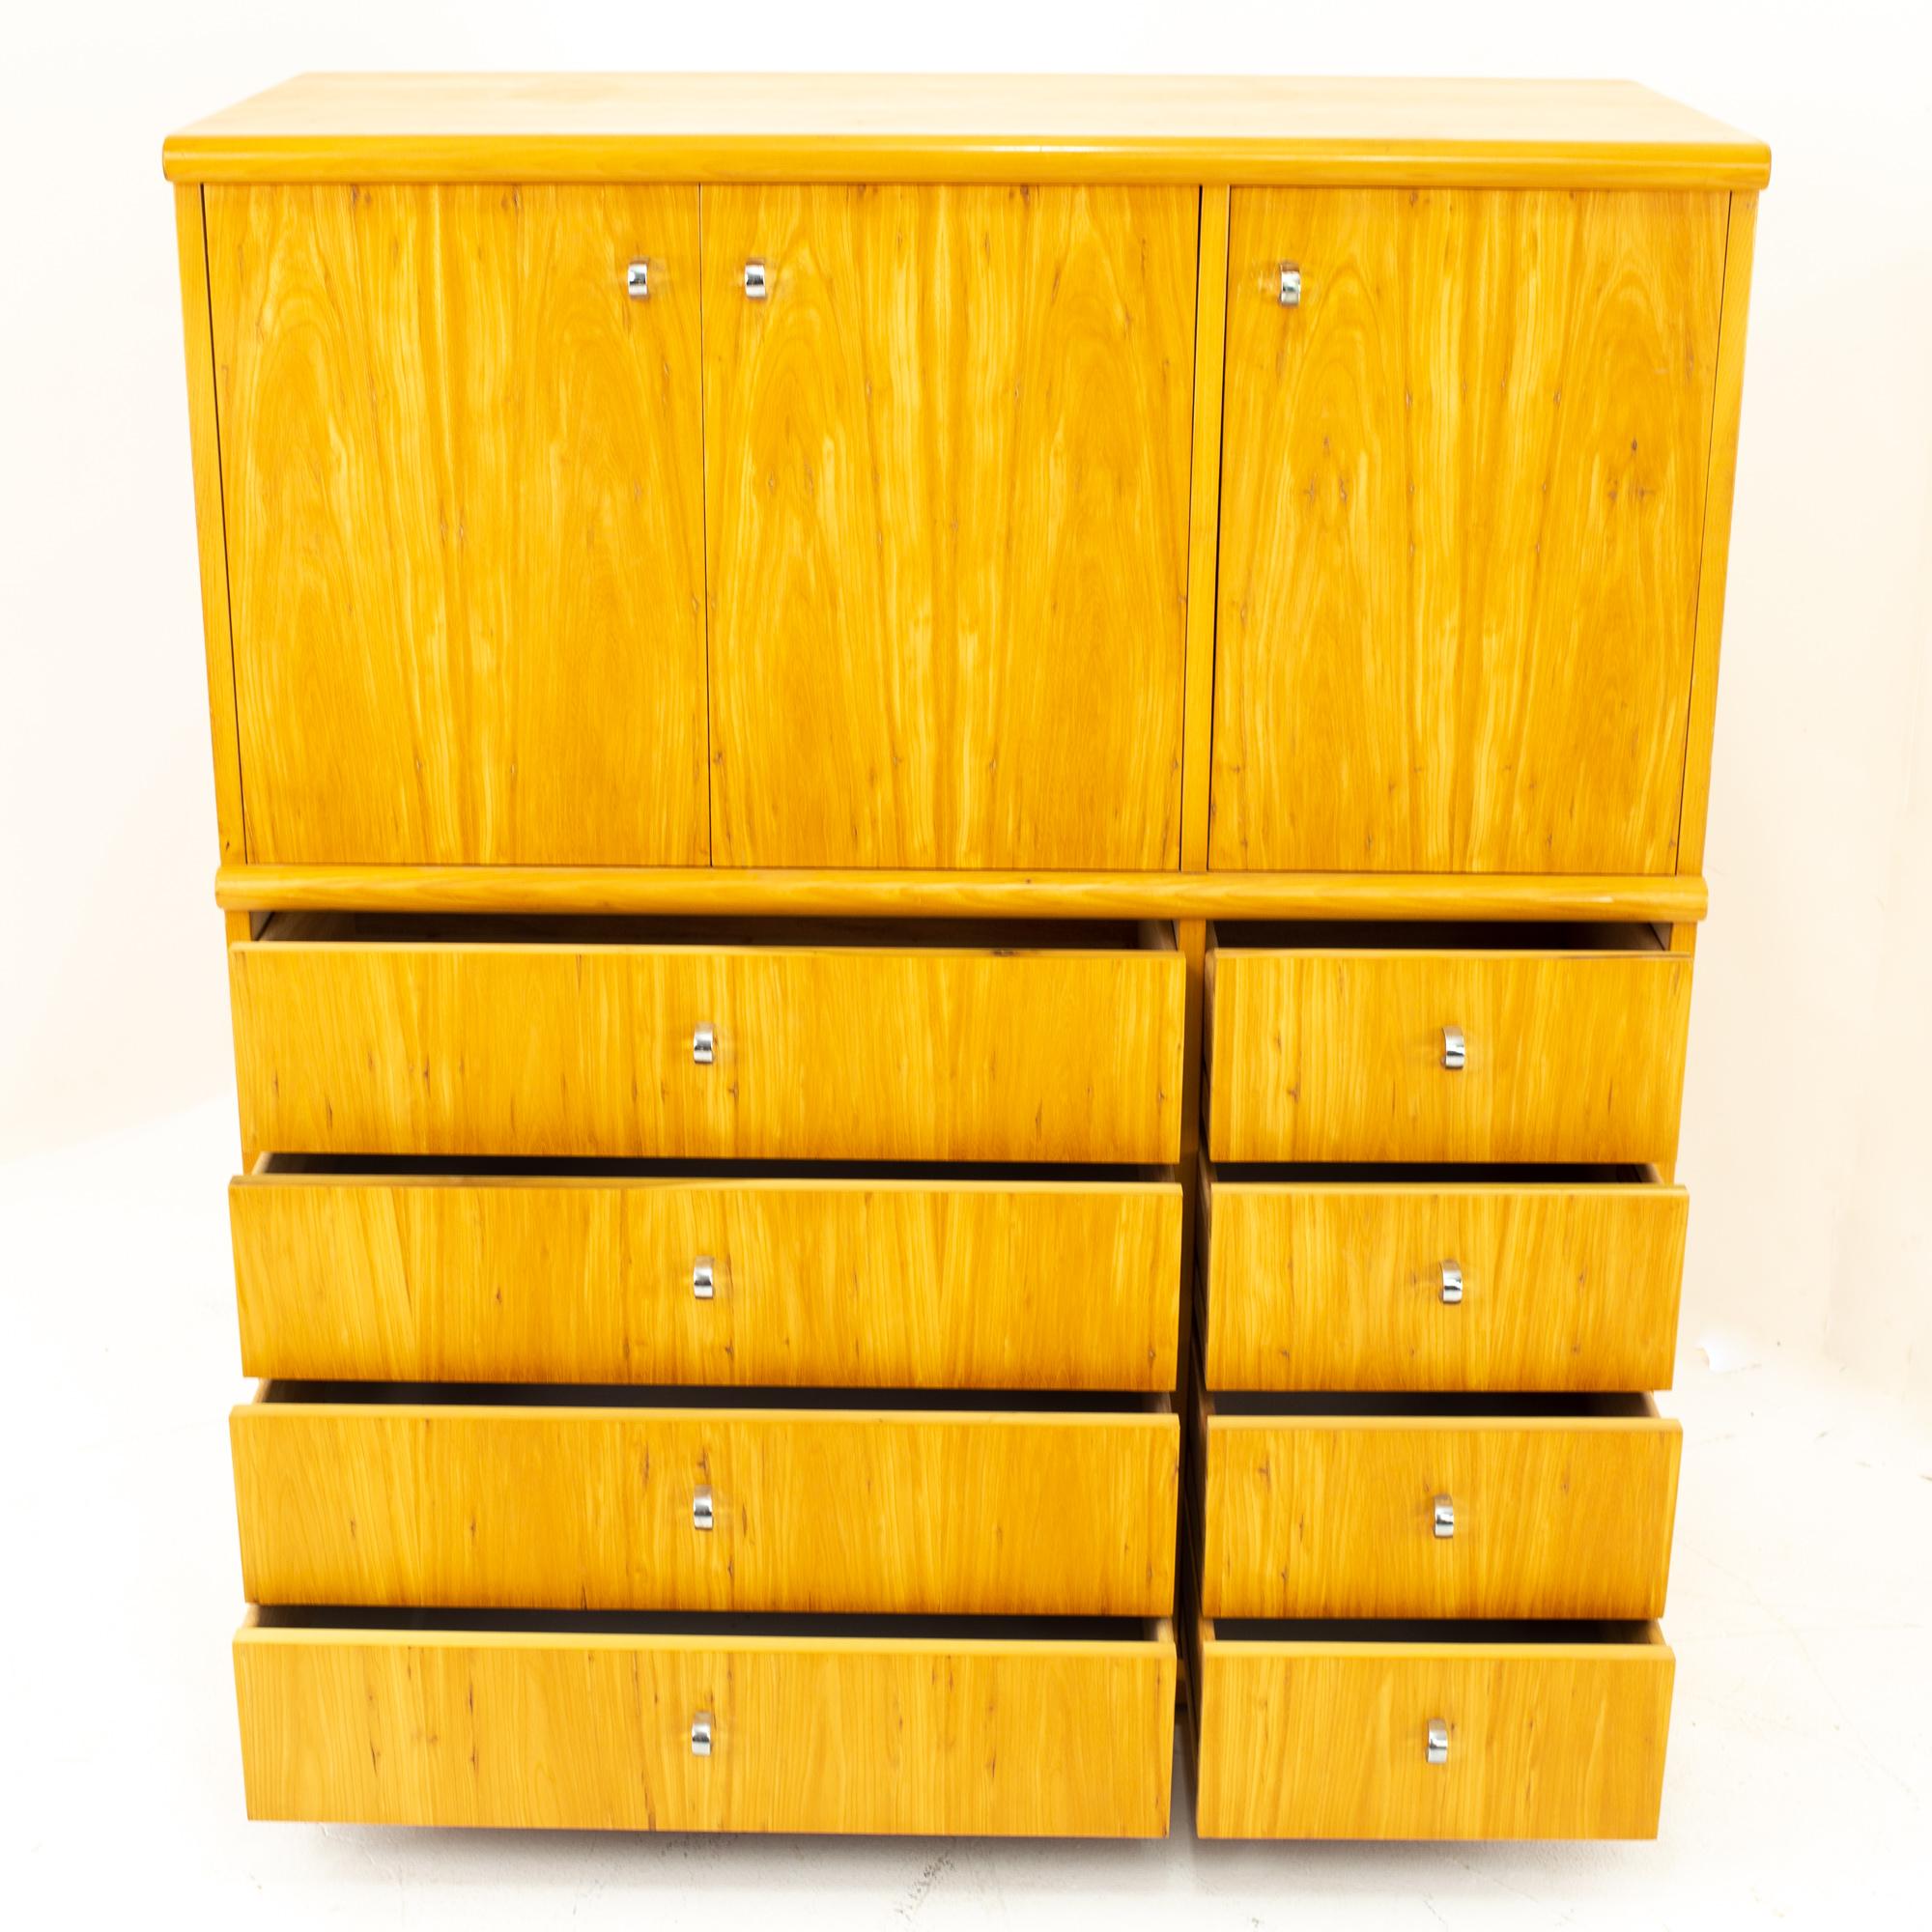 Jack Cartwright for Founders mid century 8 drawer armoire gentleman's chest

Chest measures: 41 wide x 19 deep x 48.5 high

This price includes getting this piece in what we call Restored Vintage Condition. That means the piece is permanently